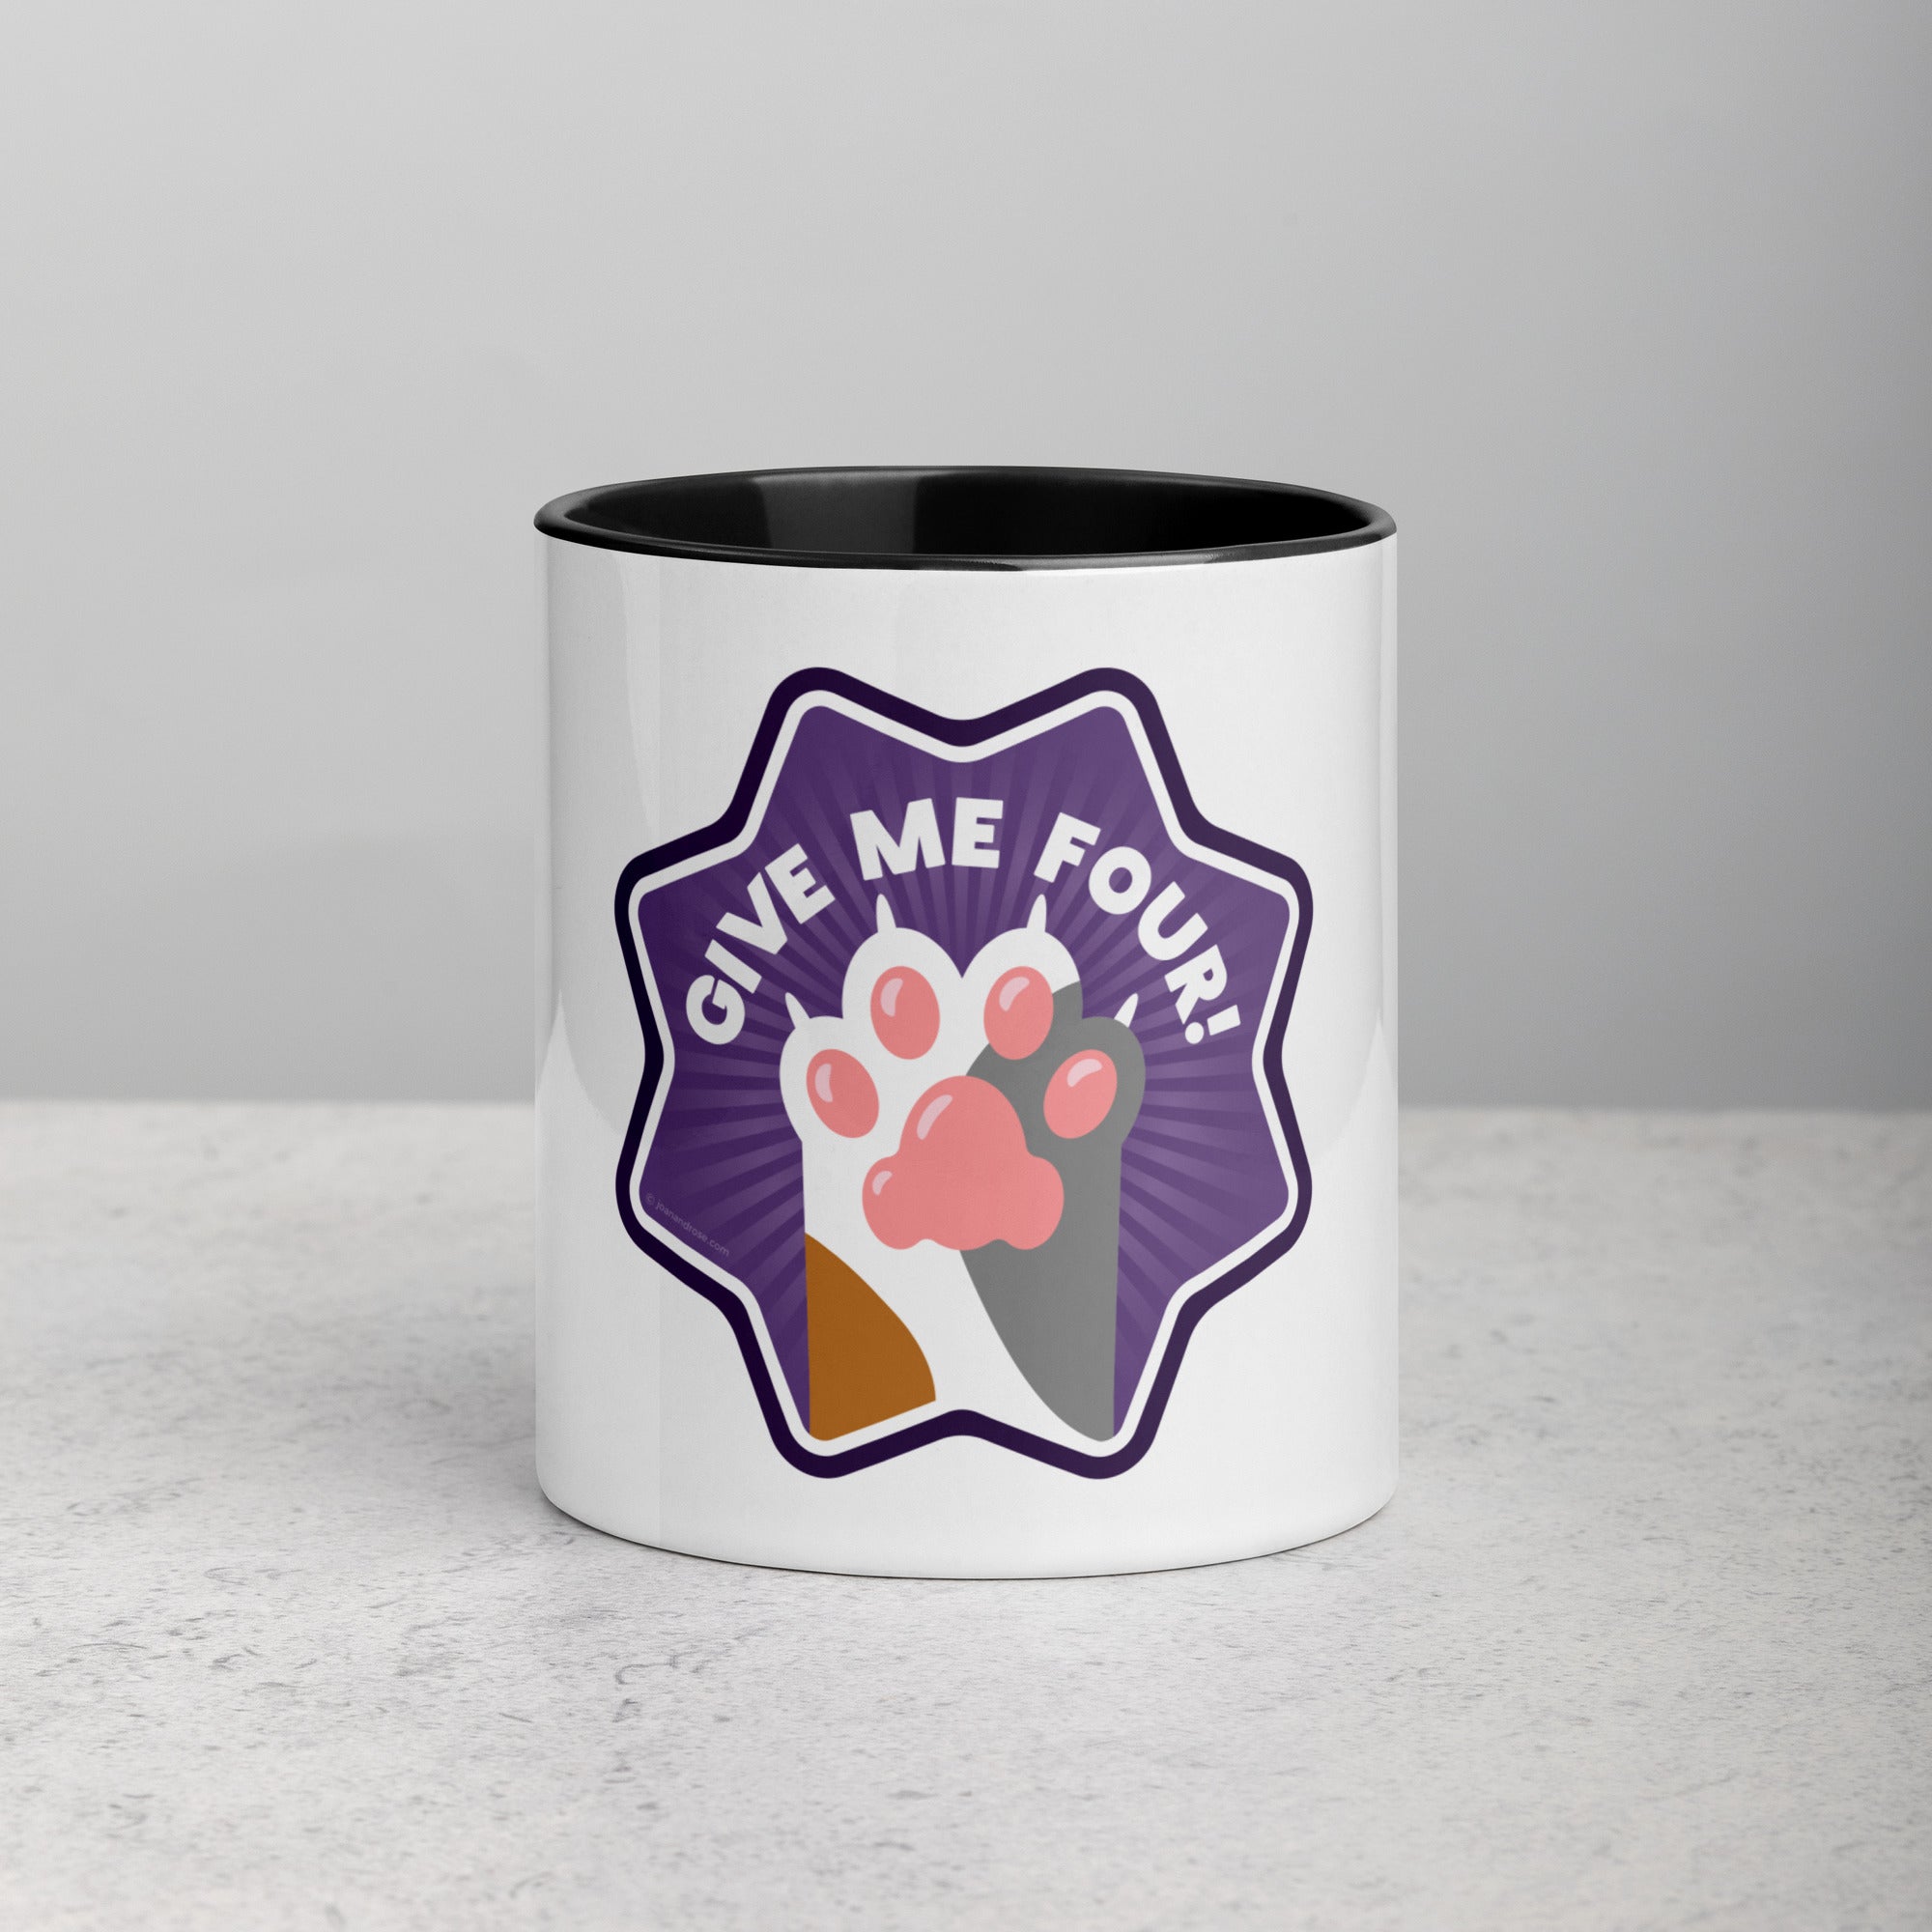 front facing image of a white mug with black interior and handle. Mug has image of a calico cats paw on a purple 8 sided star with the text 'give me four' 